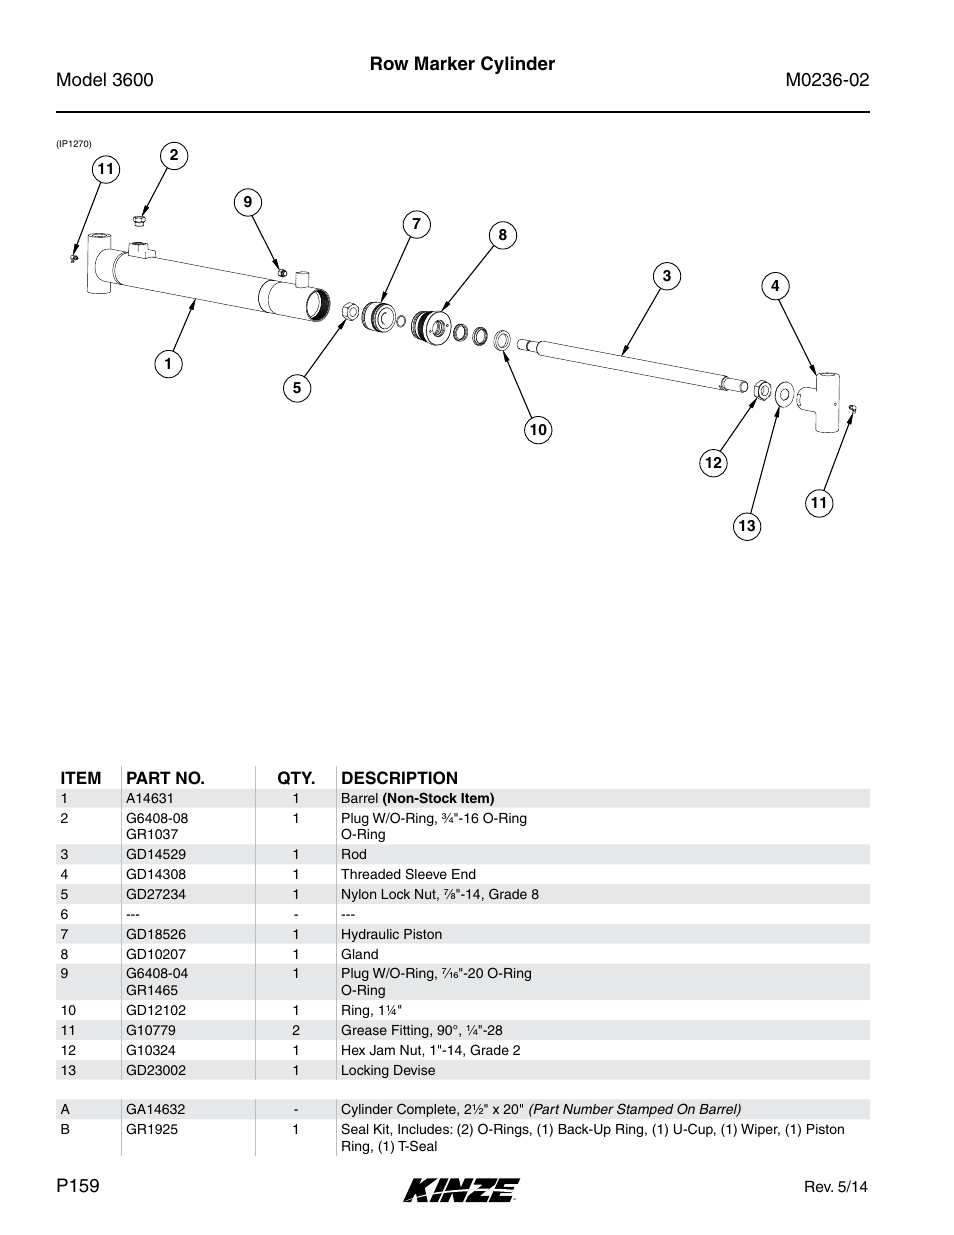 Hydraulics, Row marker cylinder | Kinze 3600 Lift and Rotate Planter Rev. 5/14 User Manual | Page 162 / 302